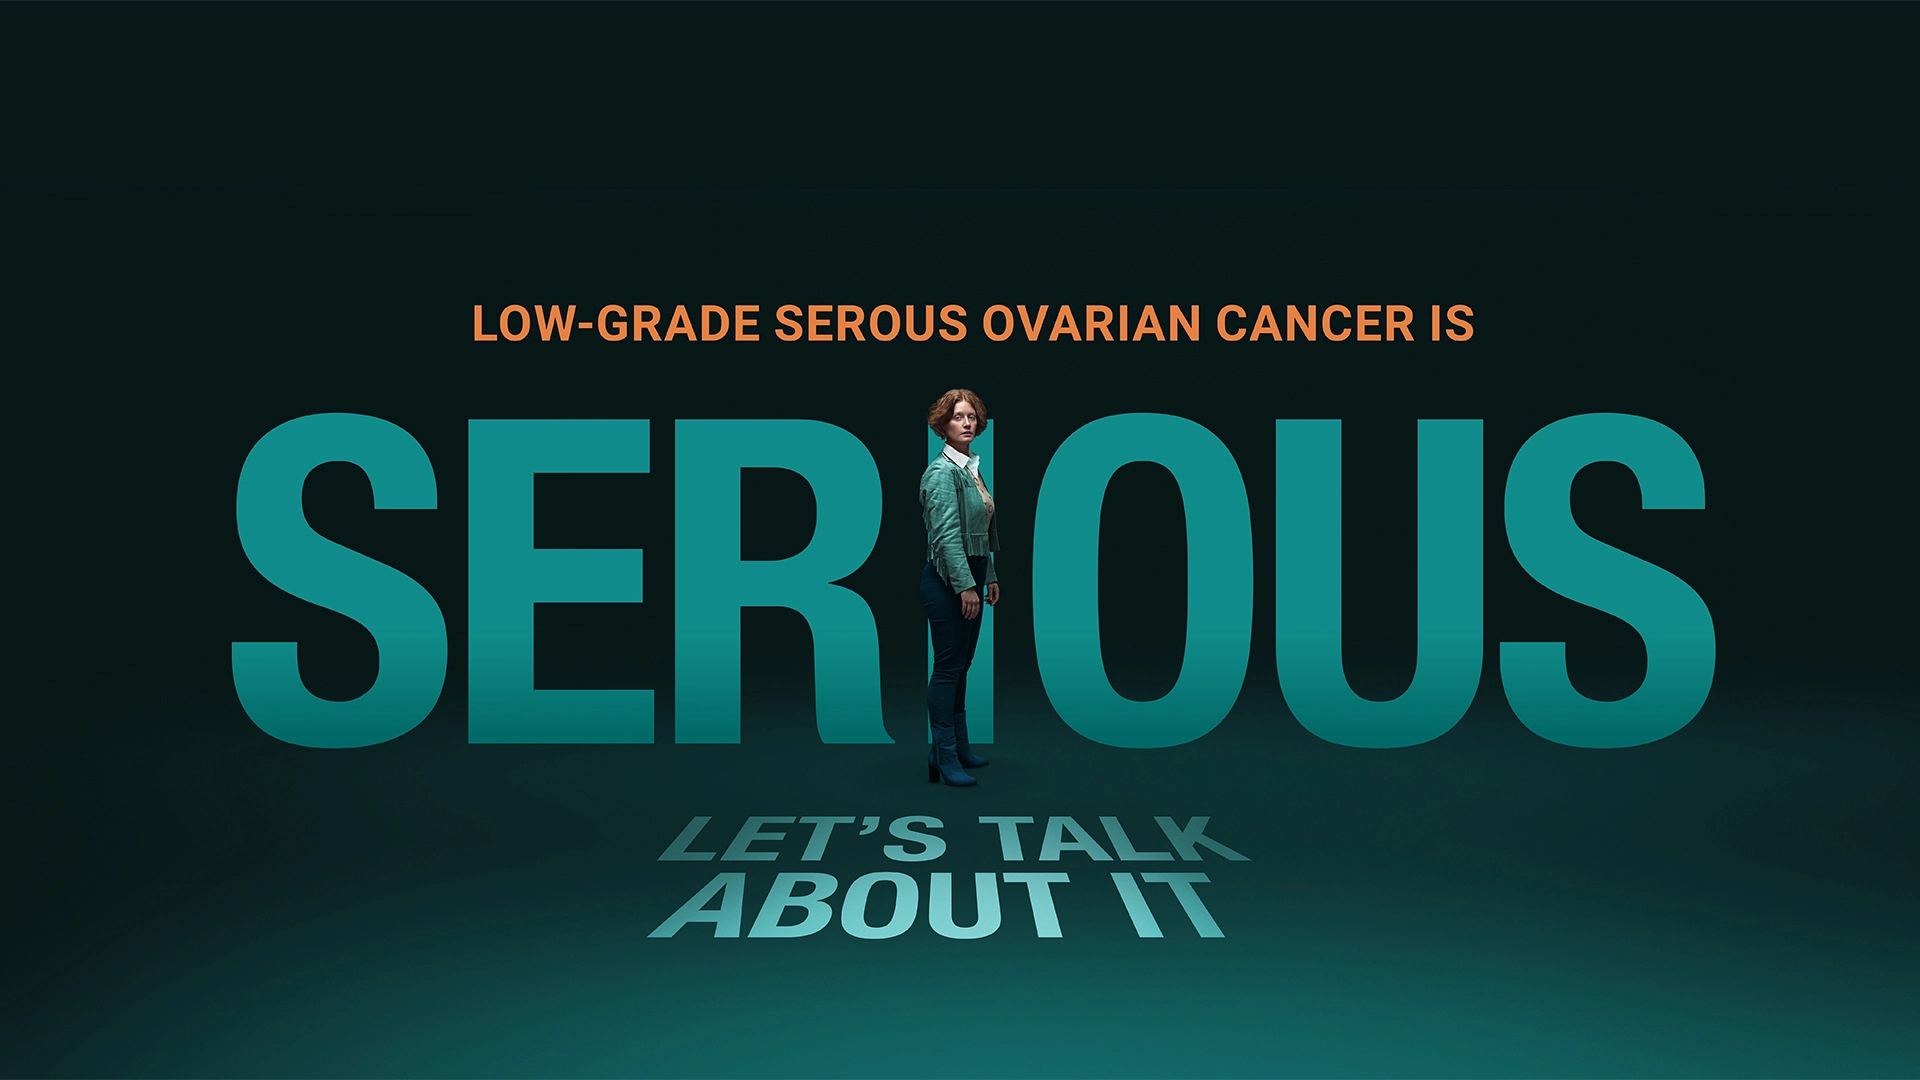 Low-grade serous ovarian cancer is serious